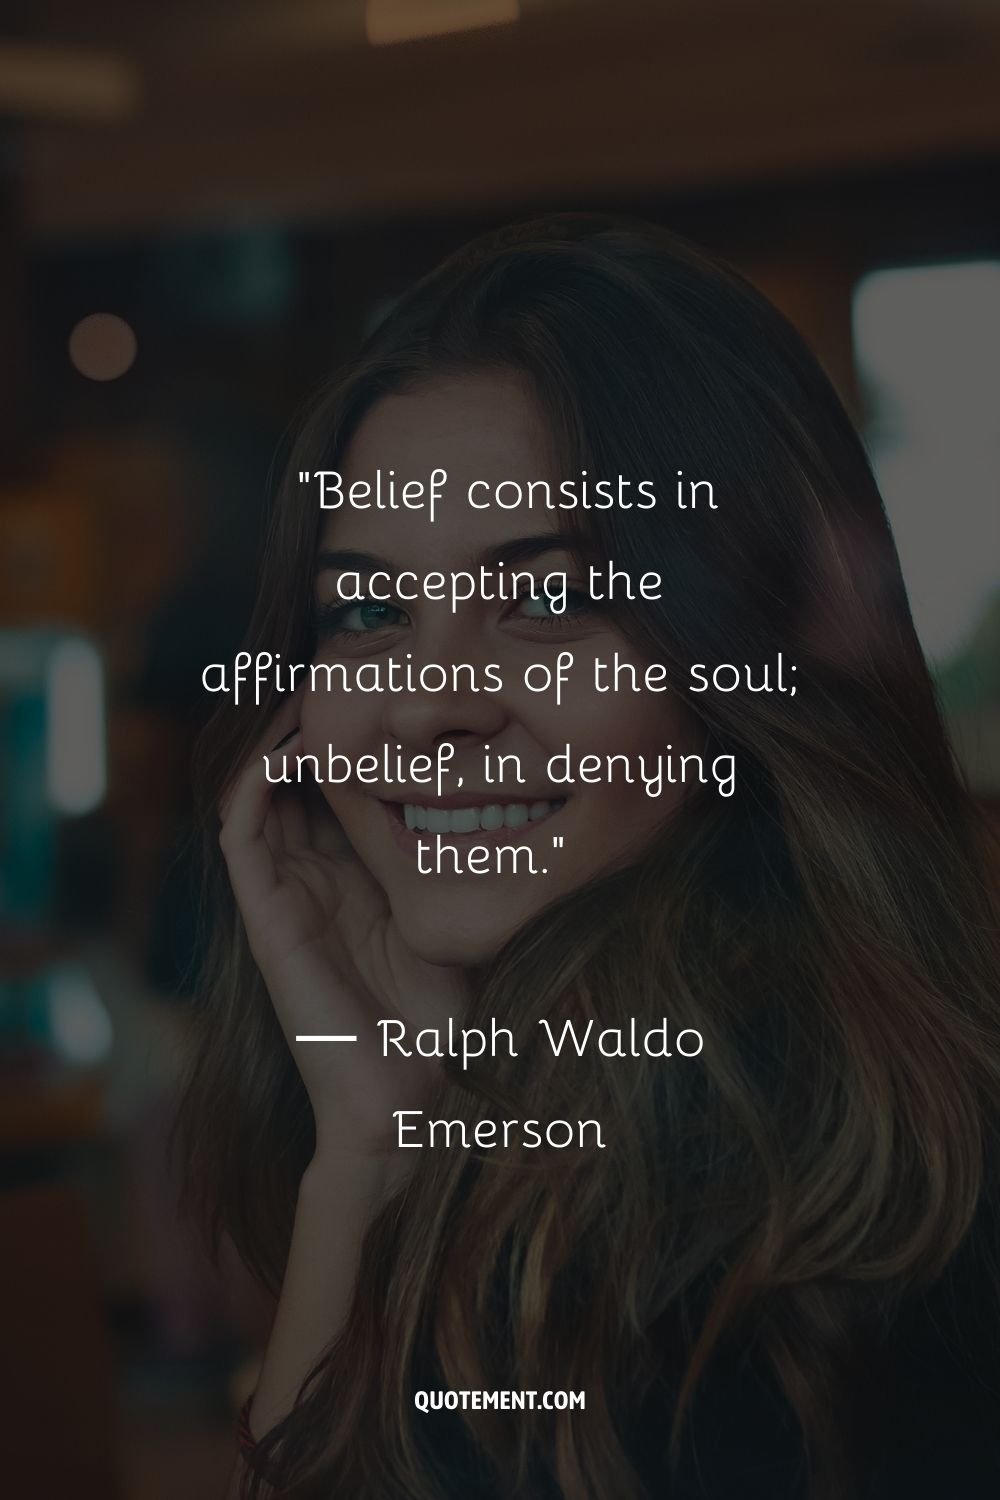 Belief consists in accepting the affirmations of the soul; unbelief, in denying them